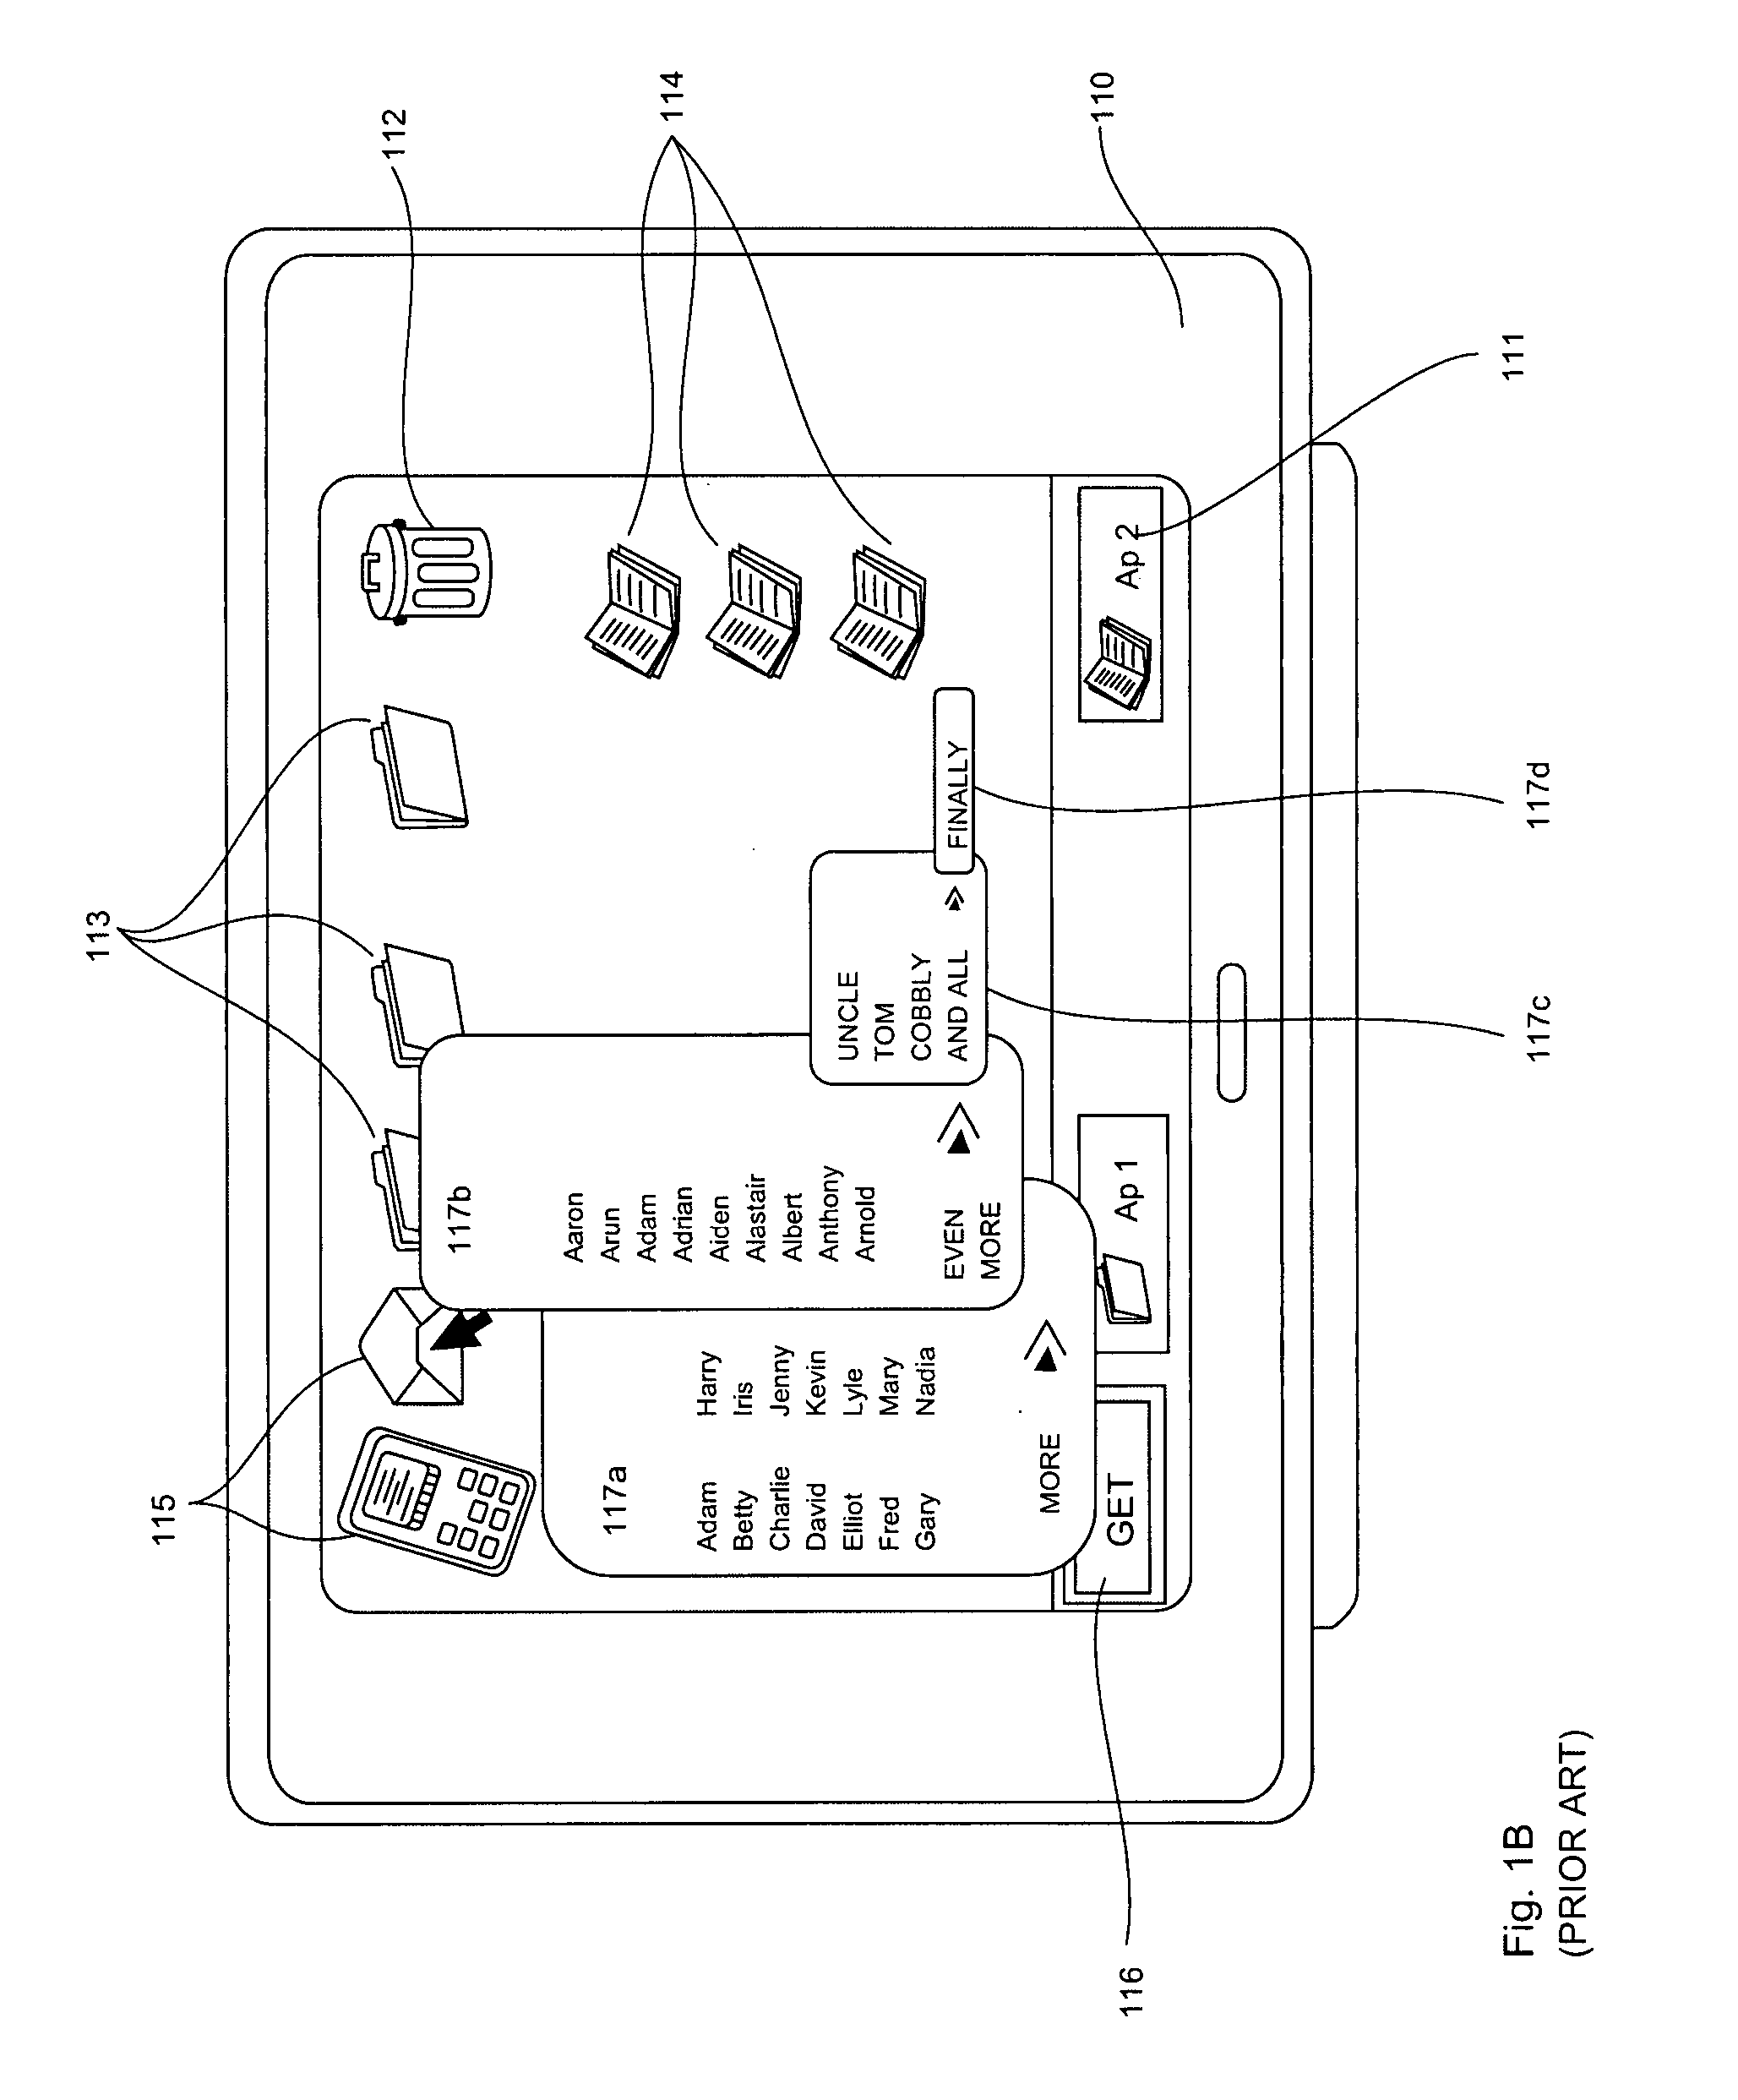 Three dimensional graphical user interface representative of a physical work space